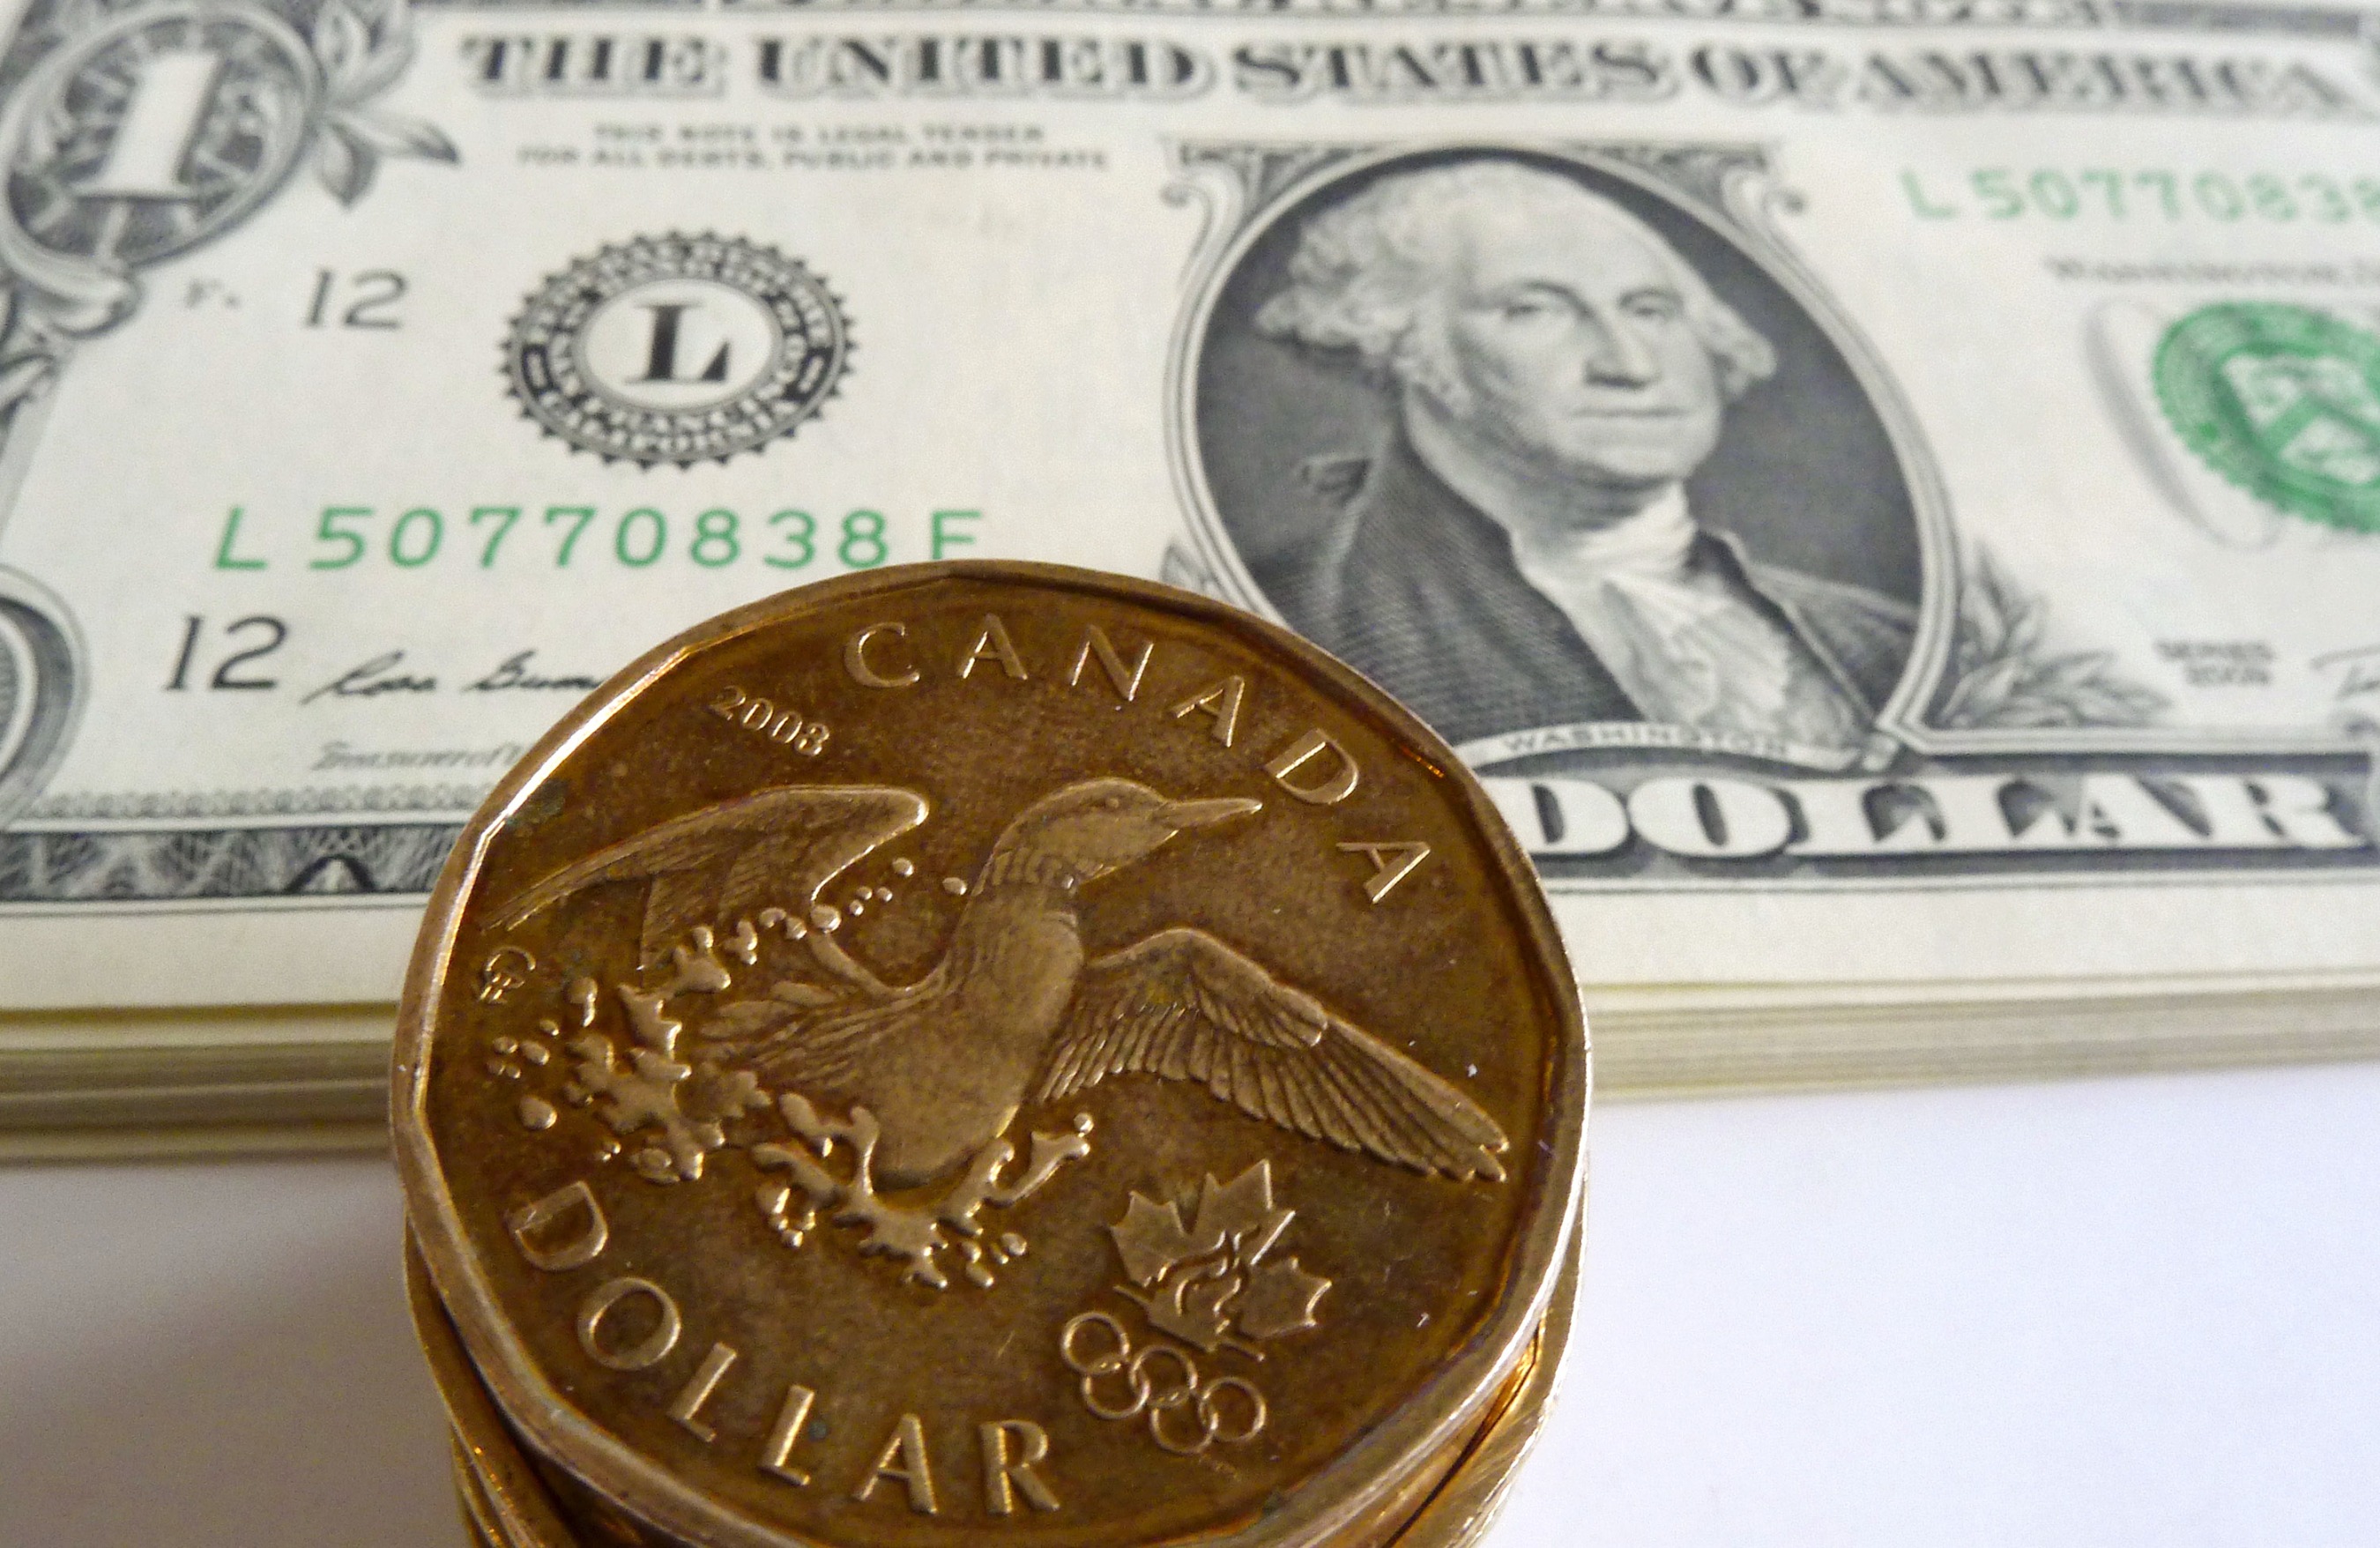 USD/CAD: Loonie weakness extends as oil prices drop